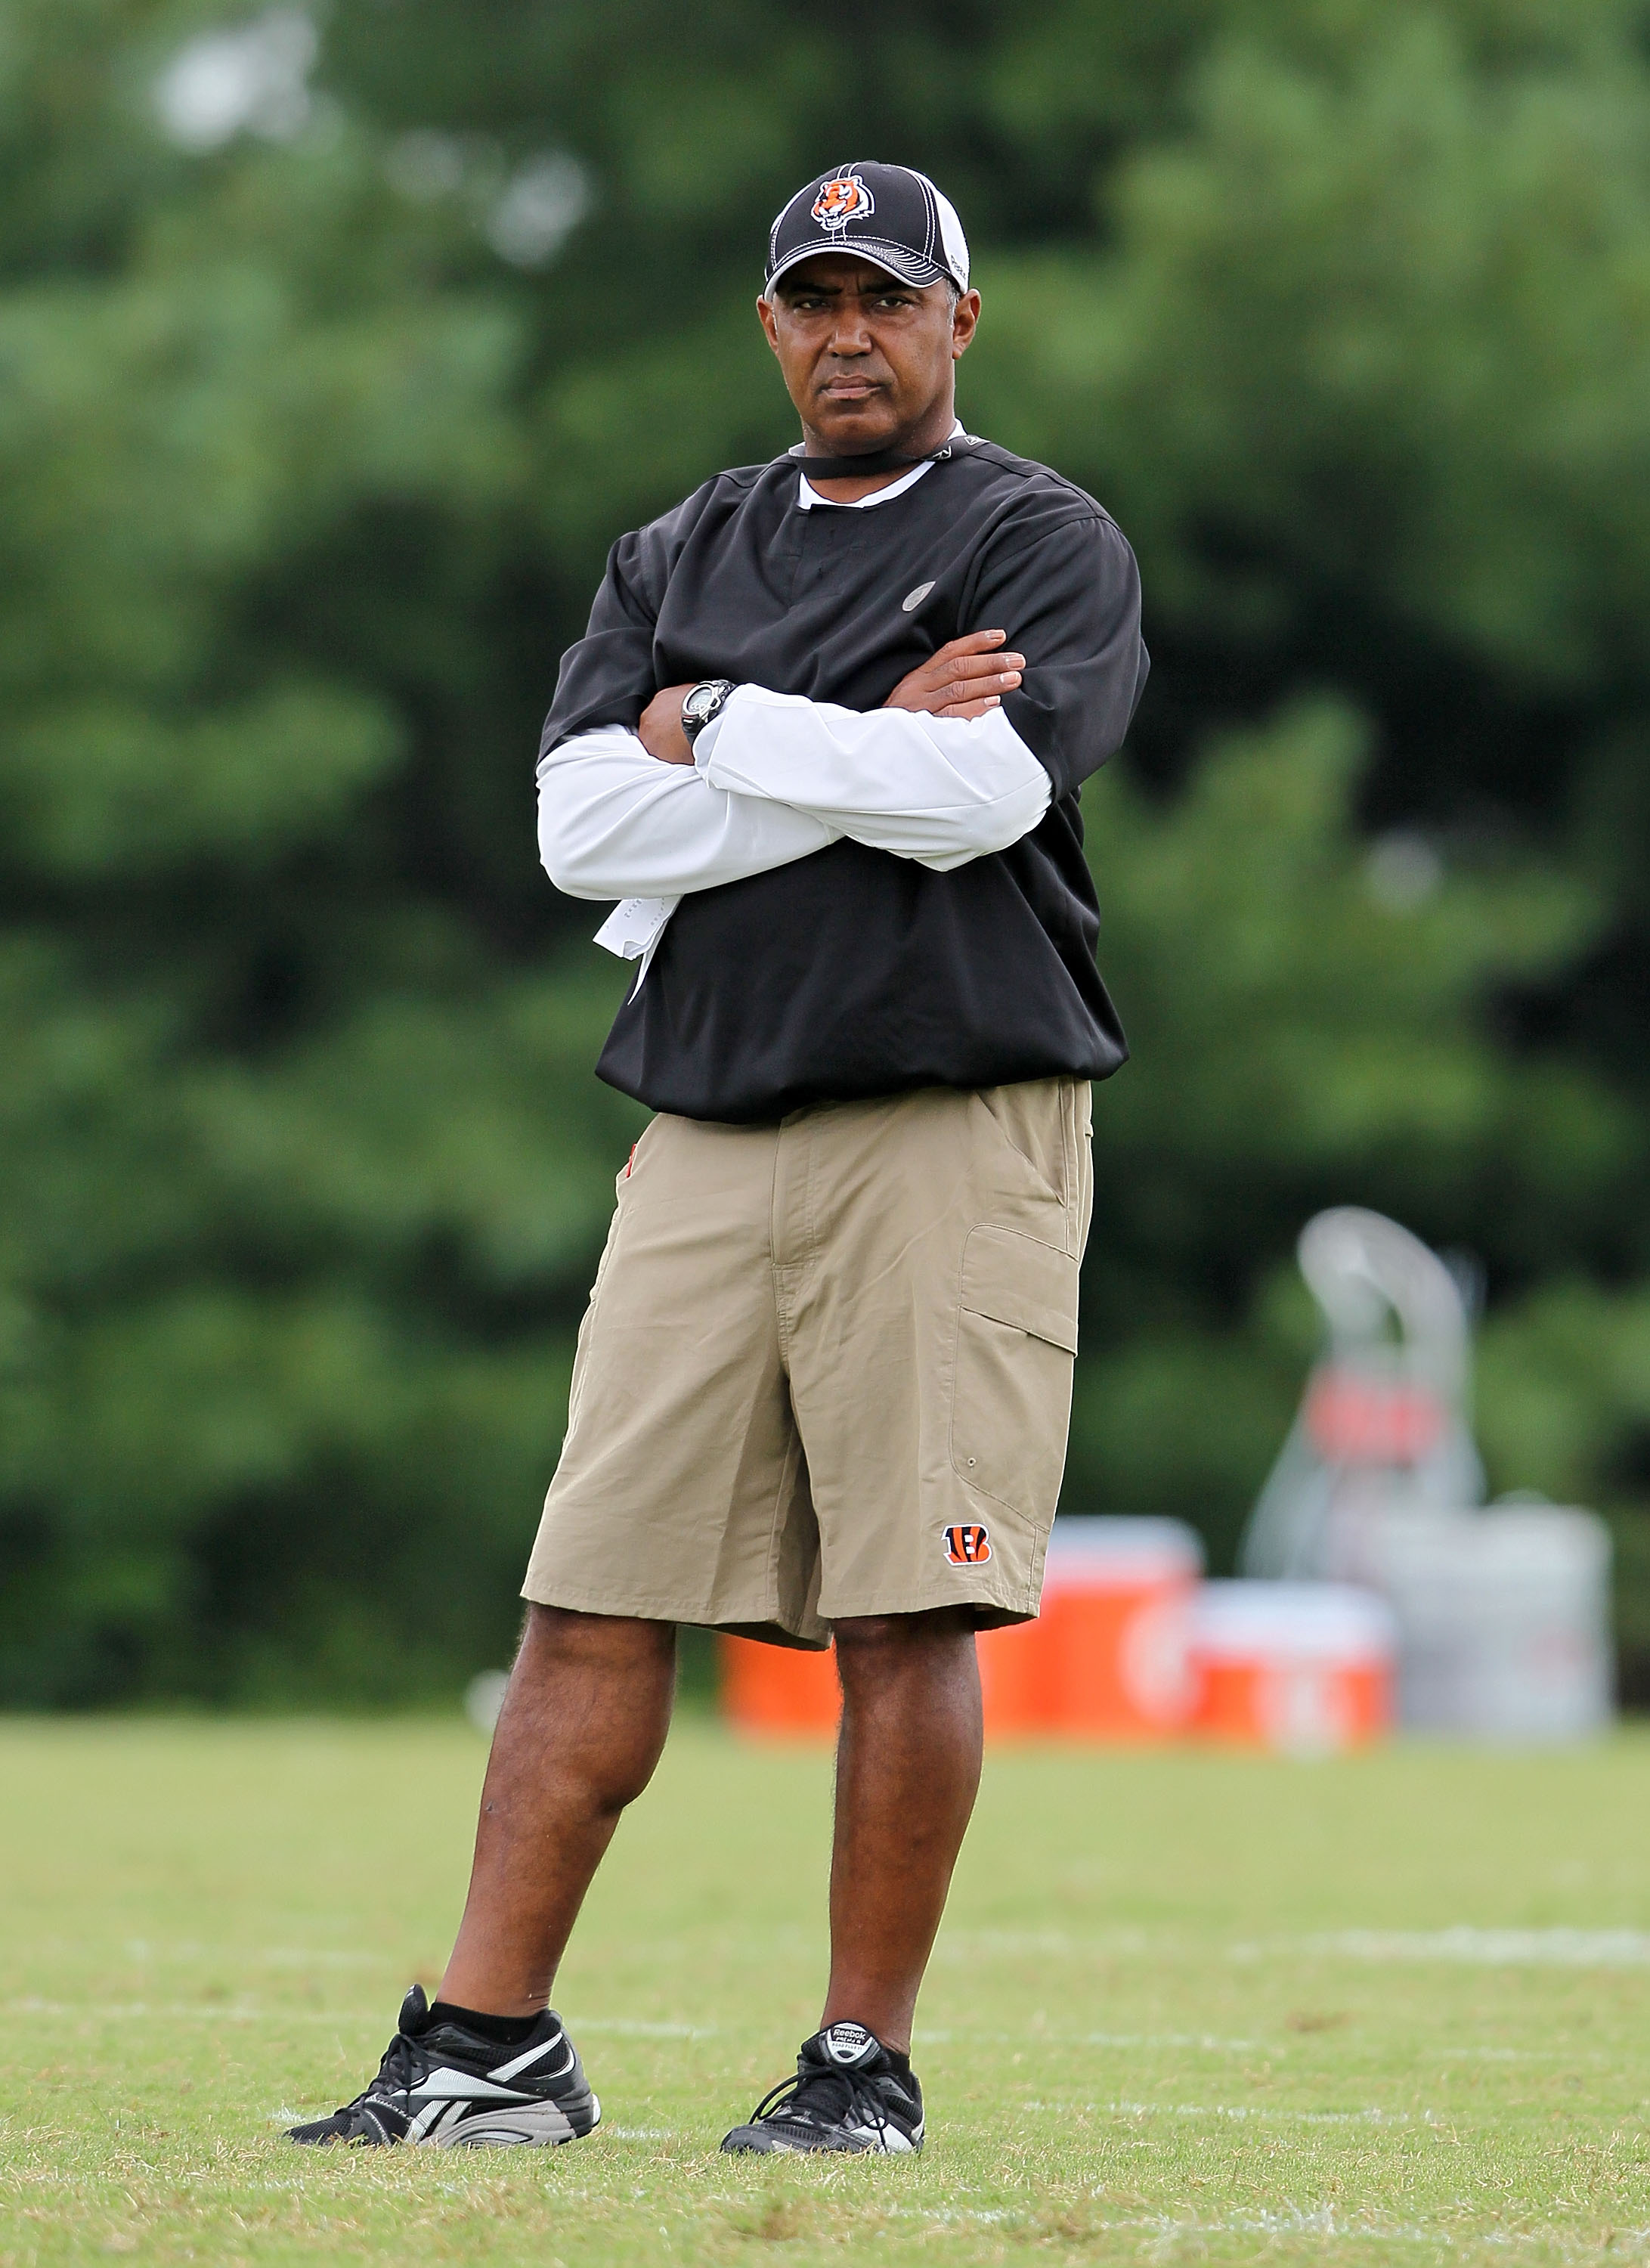 GEORGETOWN, KY - JULY 31:  Marvin Lewis the Head Coach of the Cincinnati Bengals is pictured during the Bengals training camp at Georgetown College on July 31, 2010 in Georgetown, Kentucky.  (Photo by Andy Lyons/Getty Images)